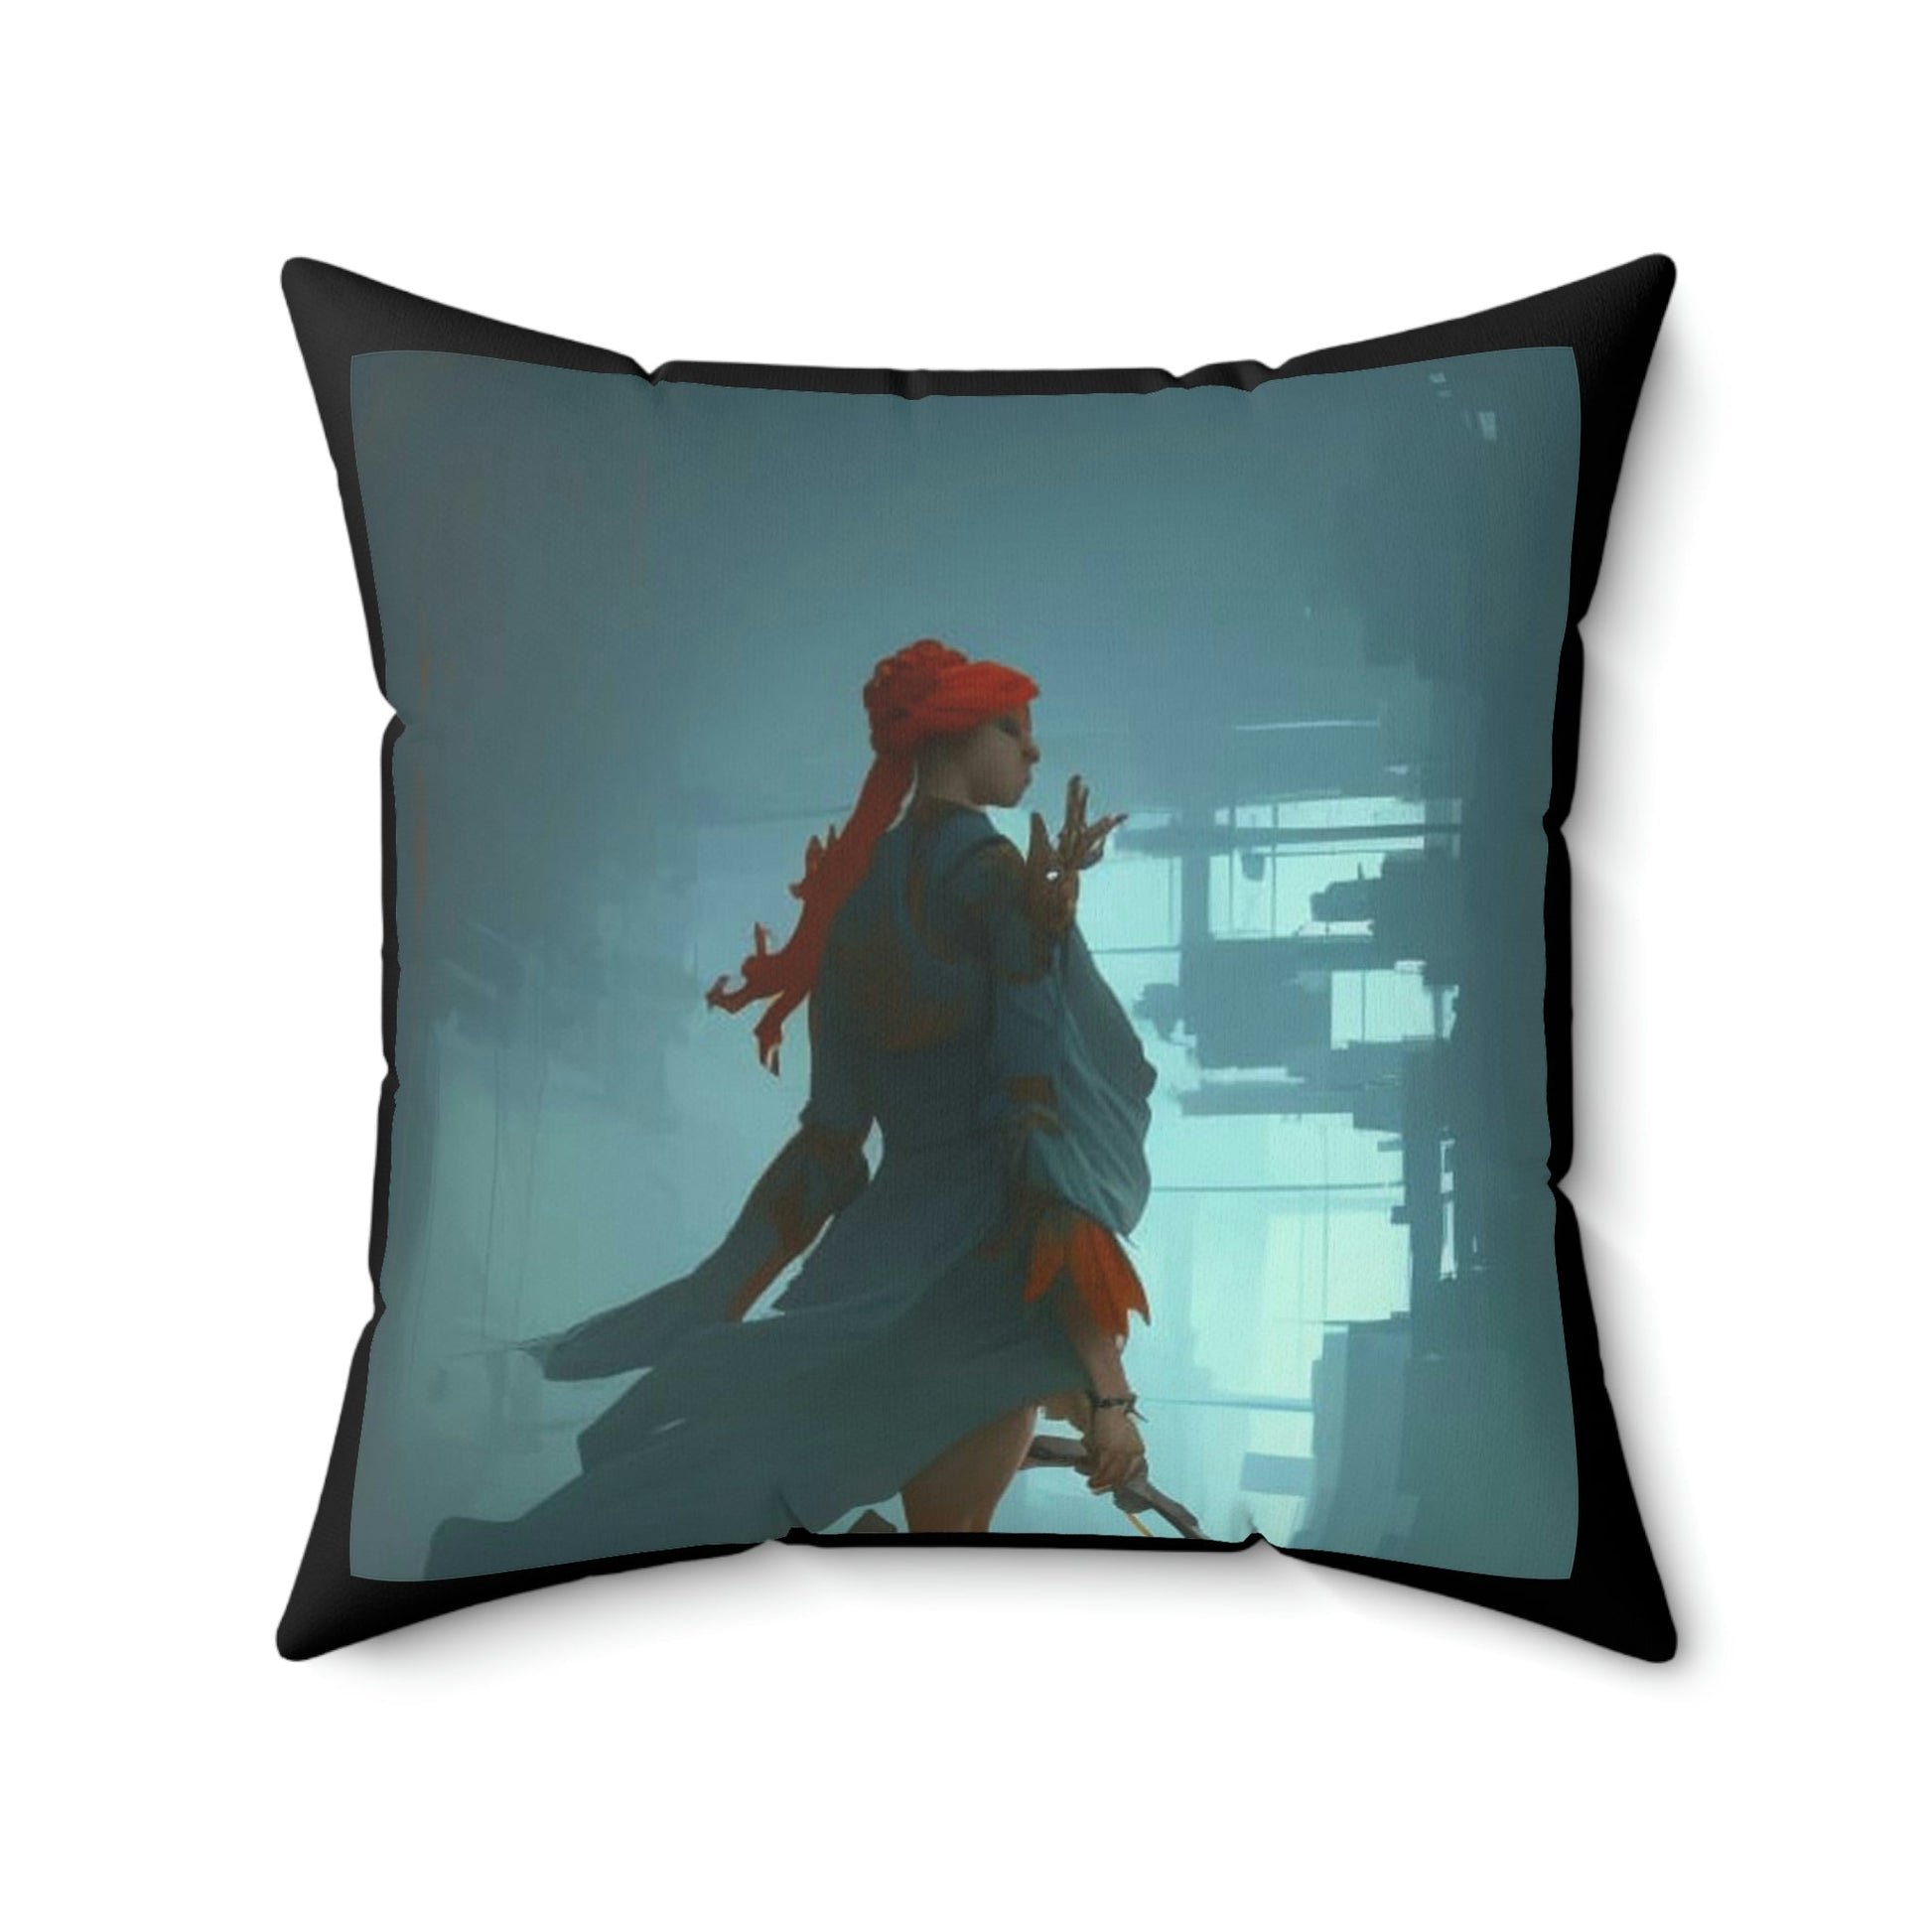 Stay Weird III Square Pillow